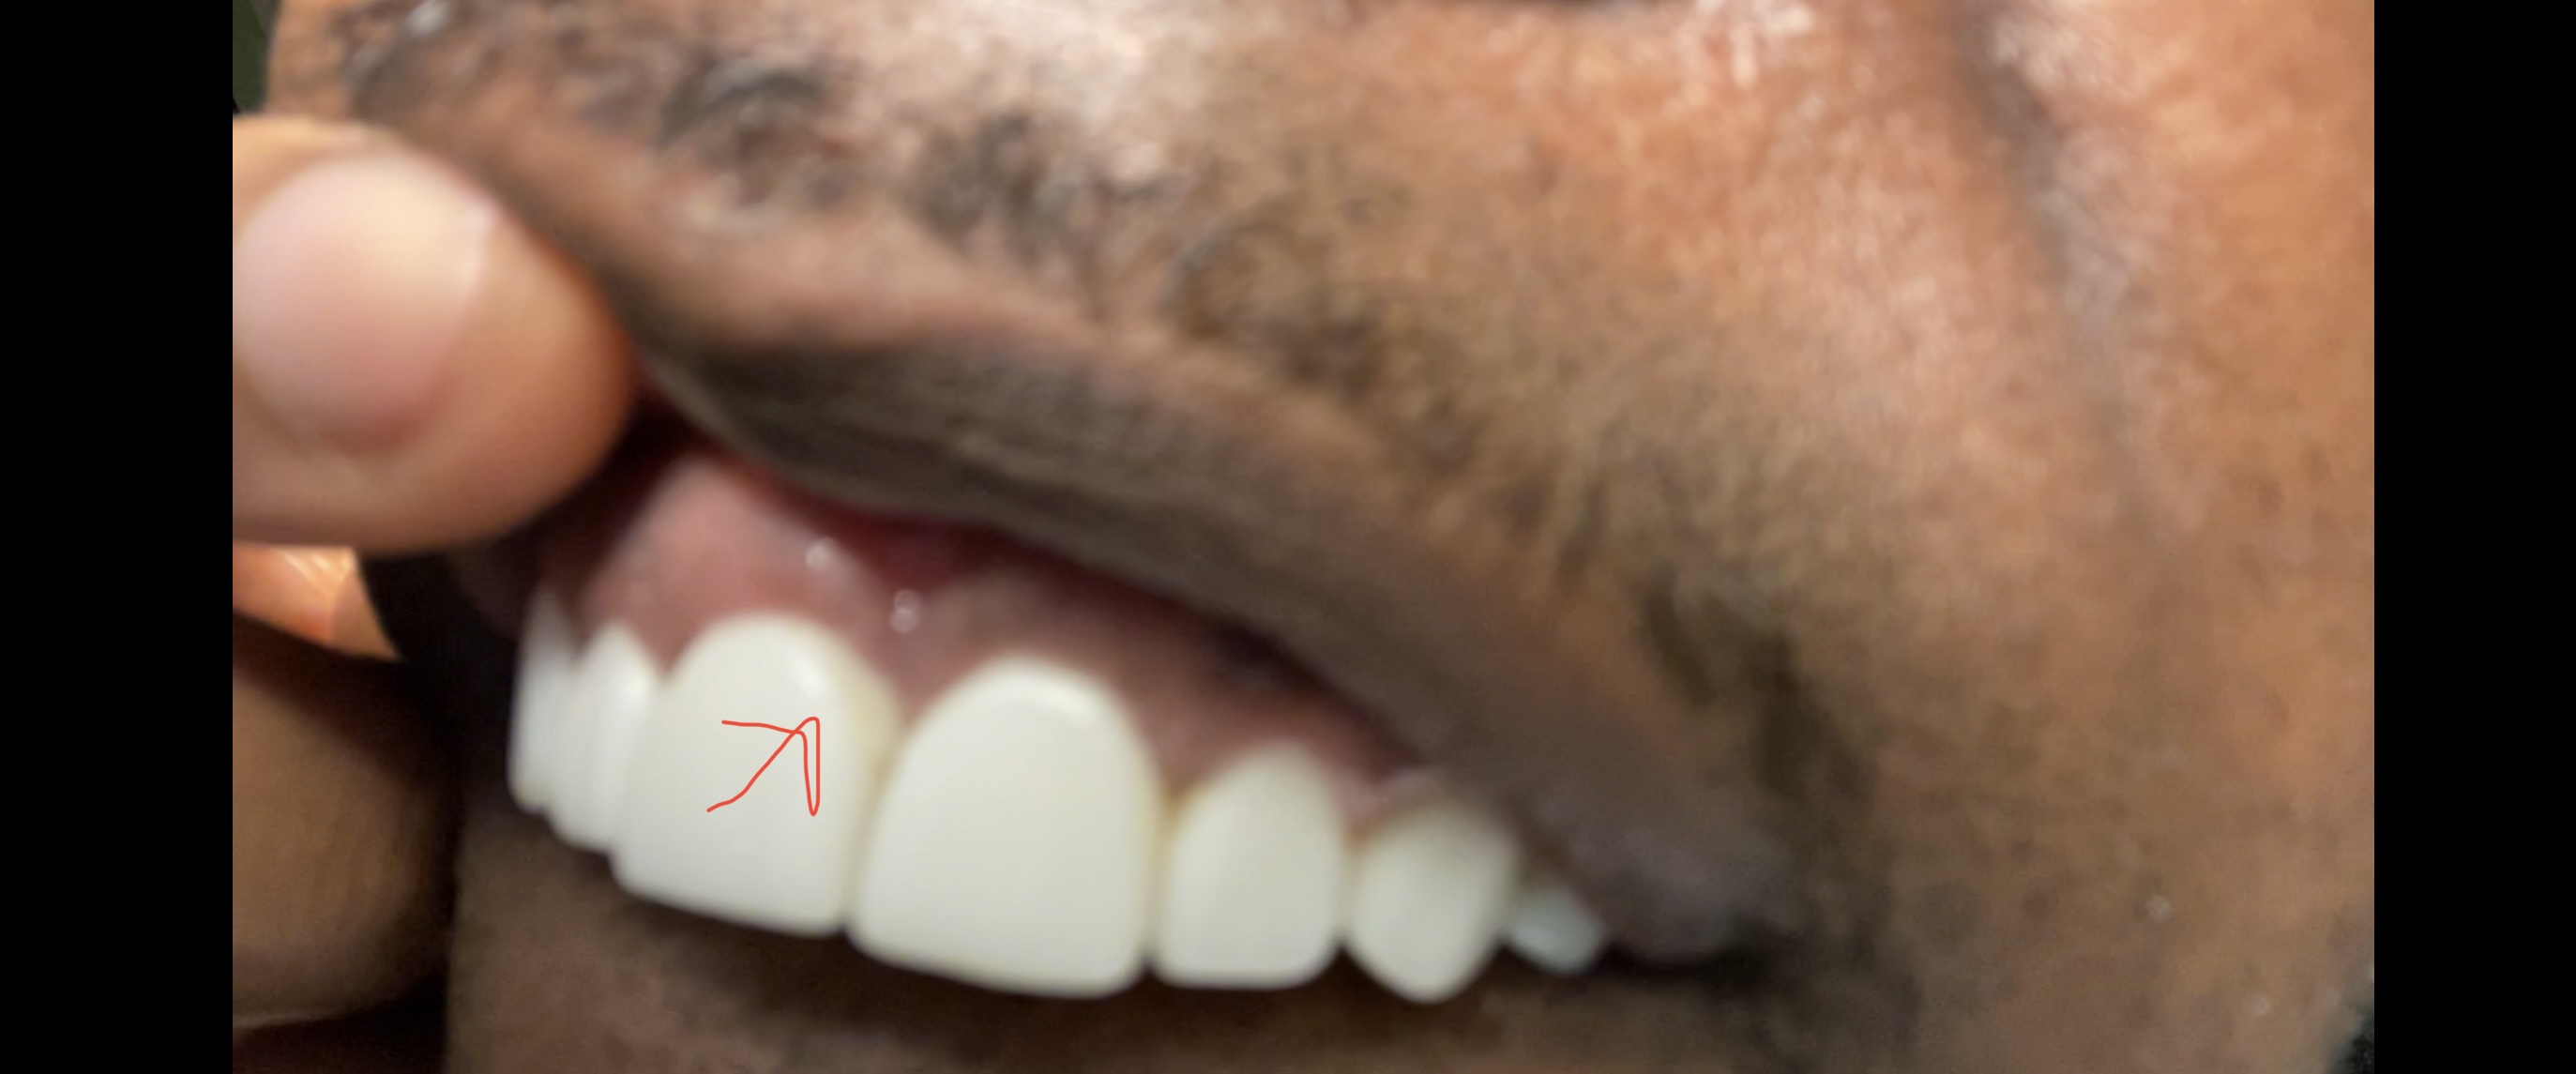 Chipped Veneers Second Angle